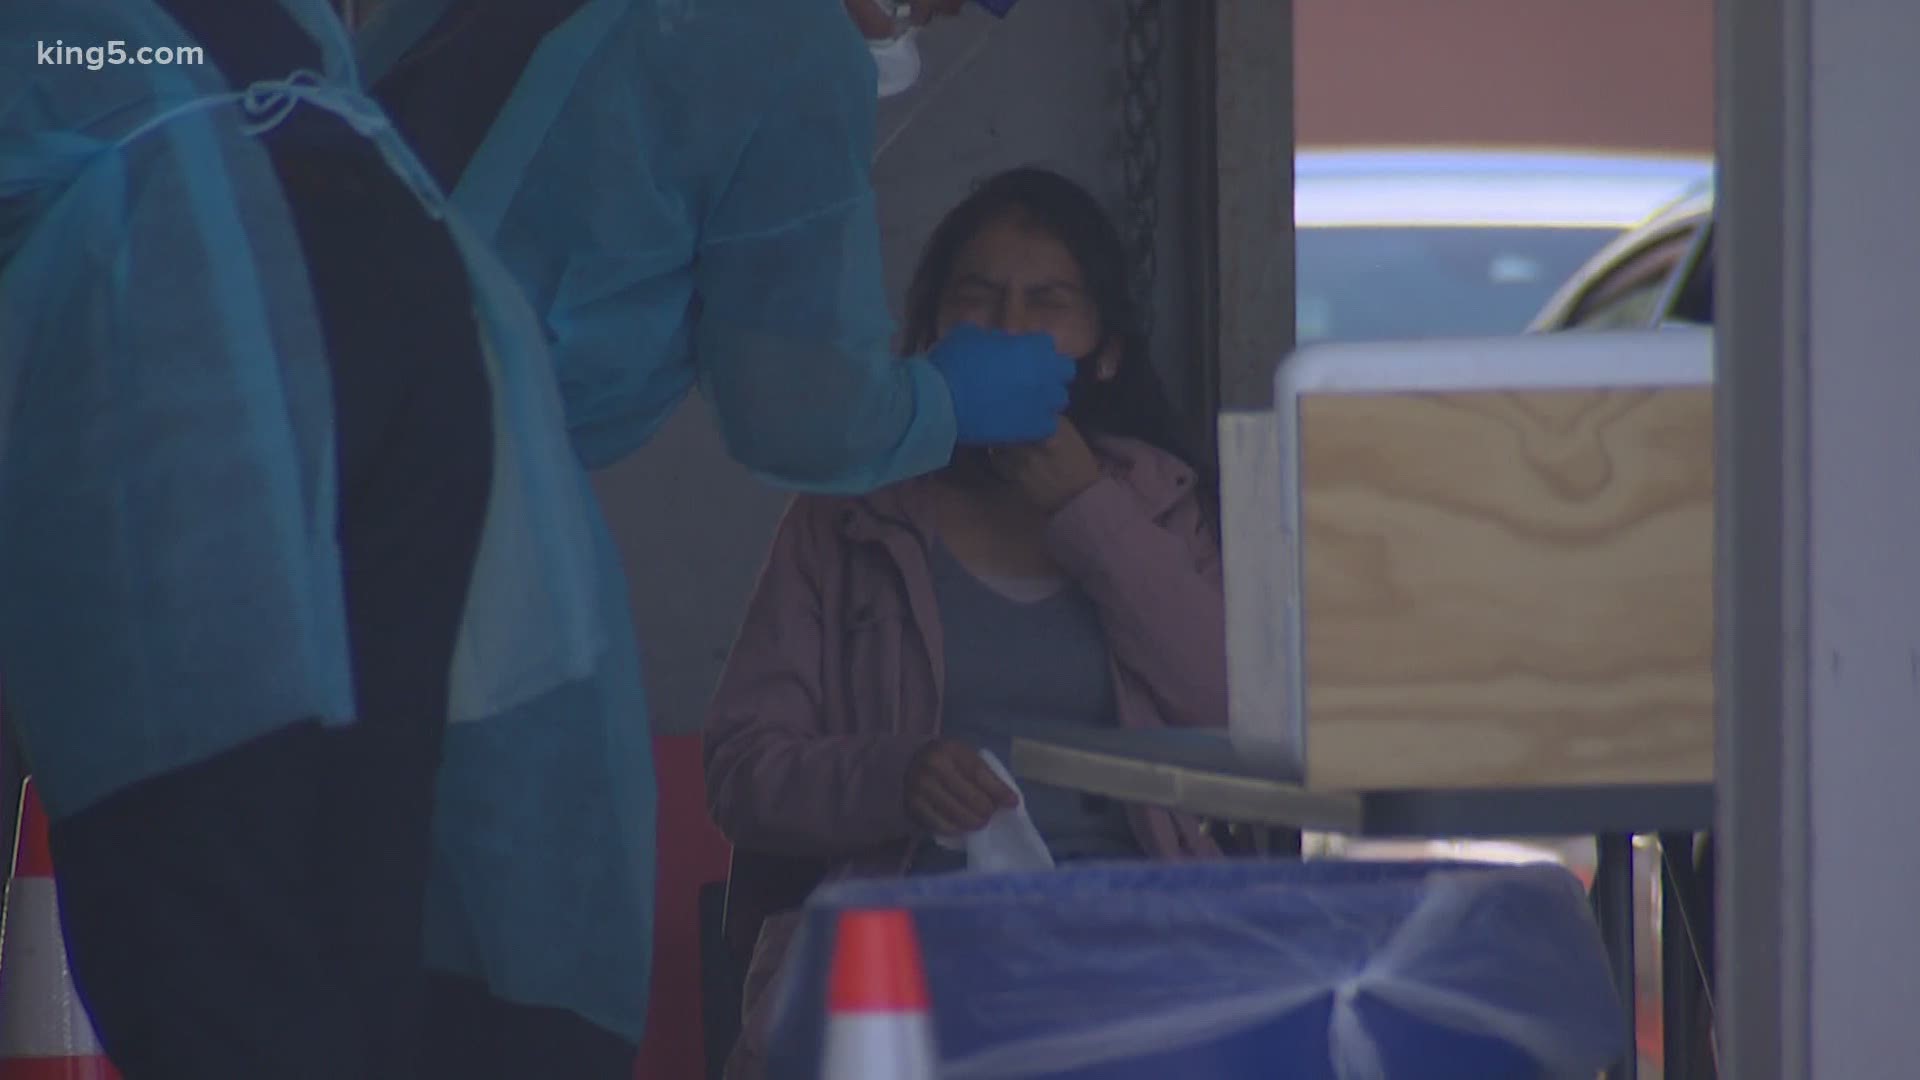 Continuing coverage of the coronavirus pandemic in the Puget Sound Metro area and Washington state on KING 5 at 8 a.m. July 11, 2020.